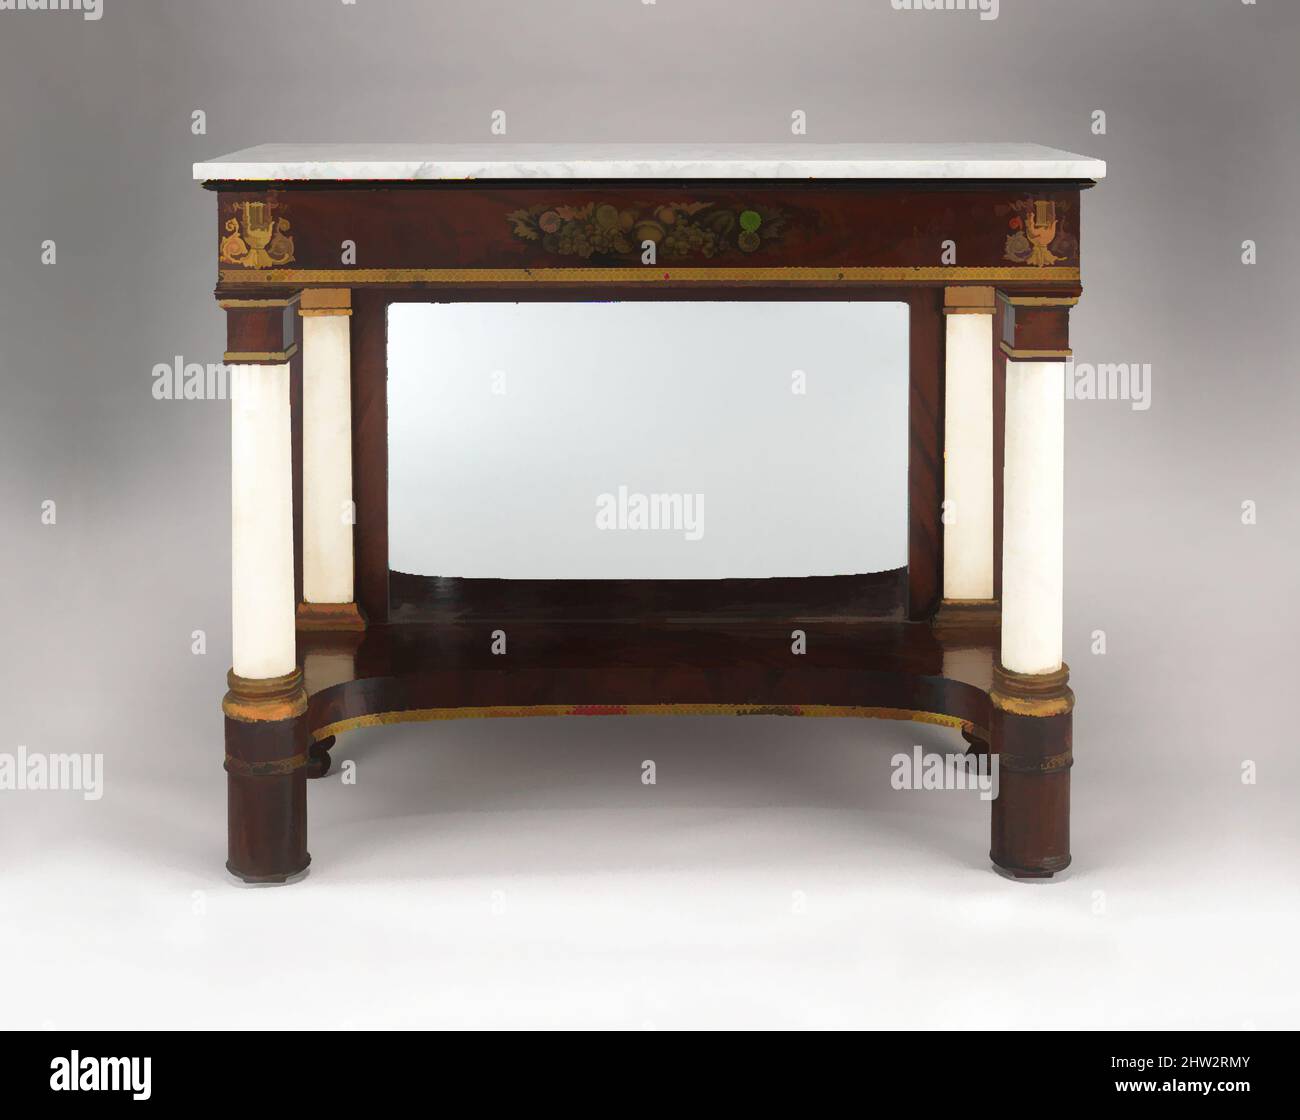 Art inspired by Pier Table, 1825–30, Made in New York, New York, United States, American, Mahogany, marble, gilded wood, mirror glass, white pine apron, plinth, yellow poplar backboard, 6 3/4 x 12 1/2 x 19 1/8 in. (17.1 x 31.8 x 48.6 cm), Furniture, Classic works modernized by Artotop with a splash of modernity. Shapes, color and value, eye-catching visual impact on art. Emotions through freedom of artworks in a contemporary way. A timeless message pursuing a wildly creative new direction. Artists turning to the digital medium and creating the Artotop NFT Stock Photo